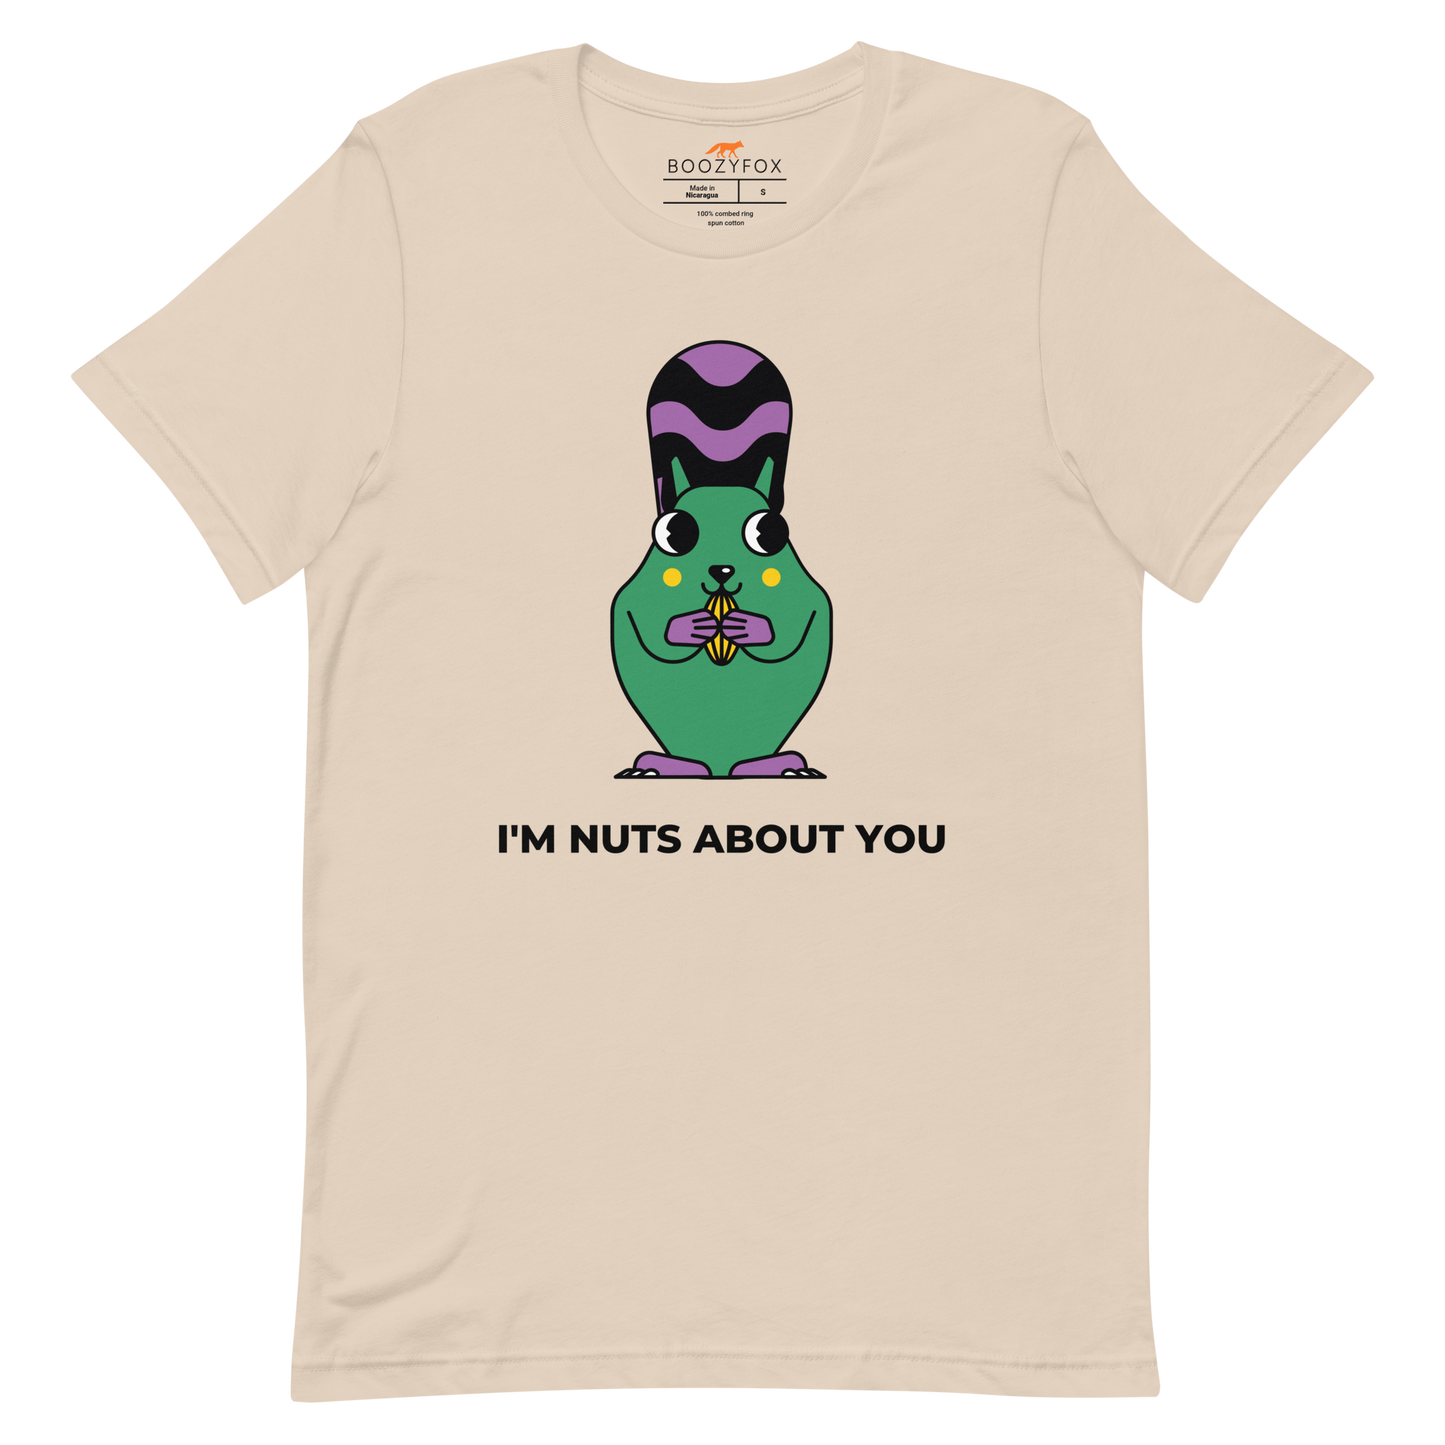 Soft Cream Premium Squirrel T-Shirt featuring an I'm Nuts About You graphic on the chest - Funny Graphic Squirrel Tees - Boozy Fox